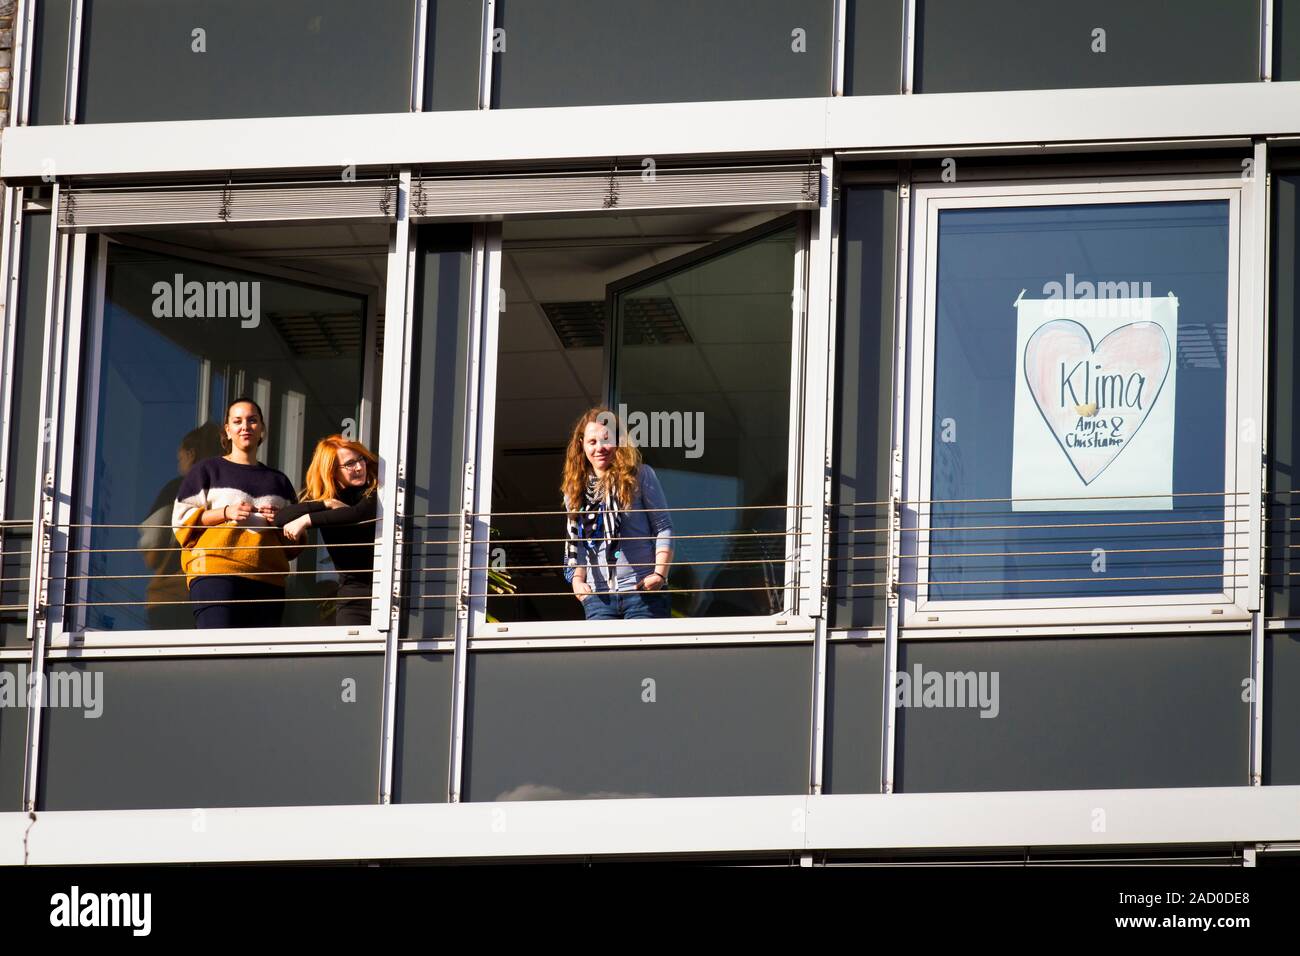 November 29, 2019 - Cologne, Germany. Spectators at  windows during Fridays for Future climate strike. 4th global day of action initiated by young peo Stock Photo